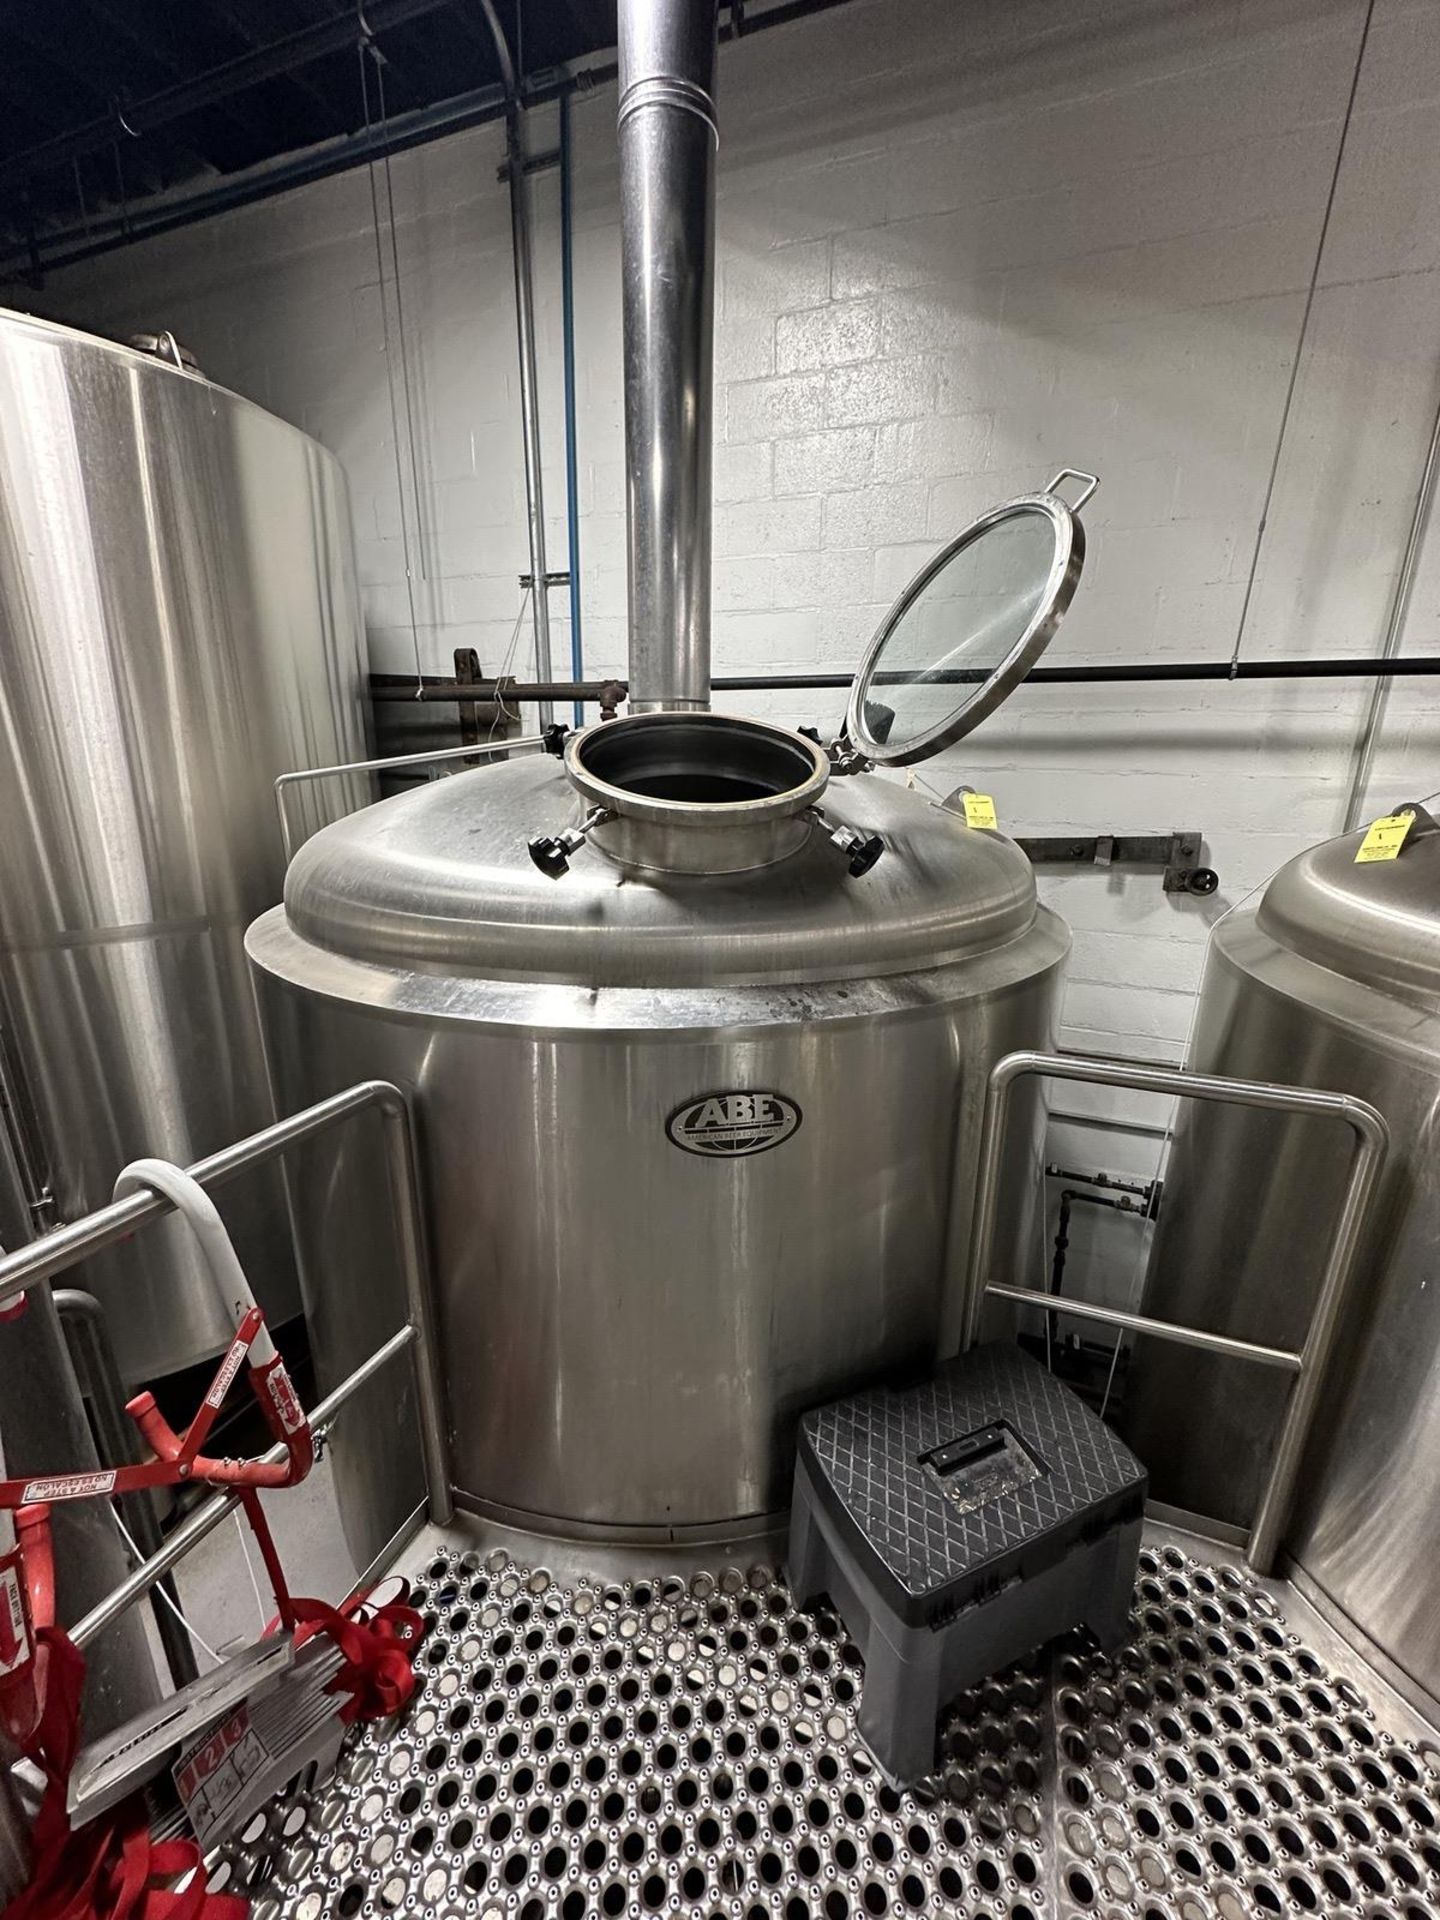 2016 ABE 30 BBL 4-Vessel Brewhouse - Brew Kettle, Mash Tun, Lauter Tun &amp; Whirlp | Rig Fee $12500 - Image 4 of 11